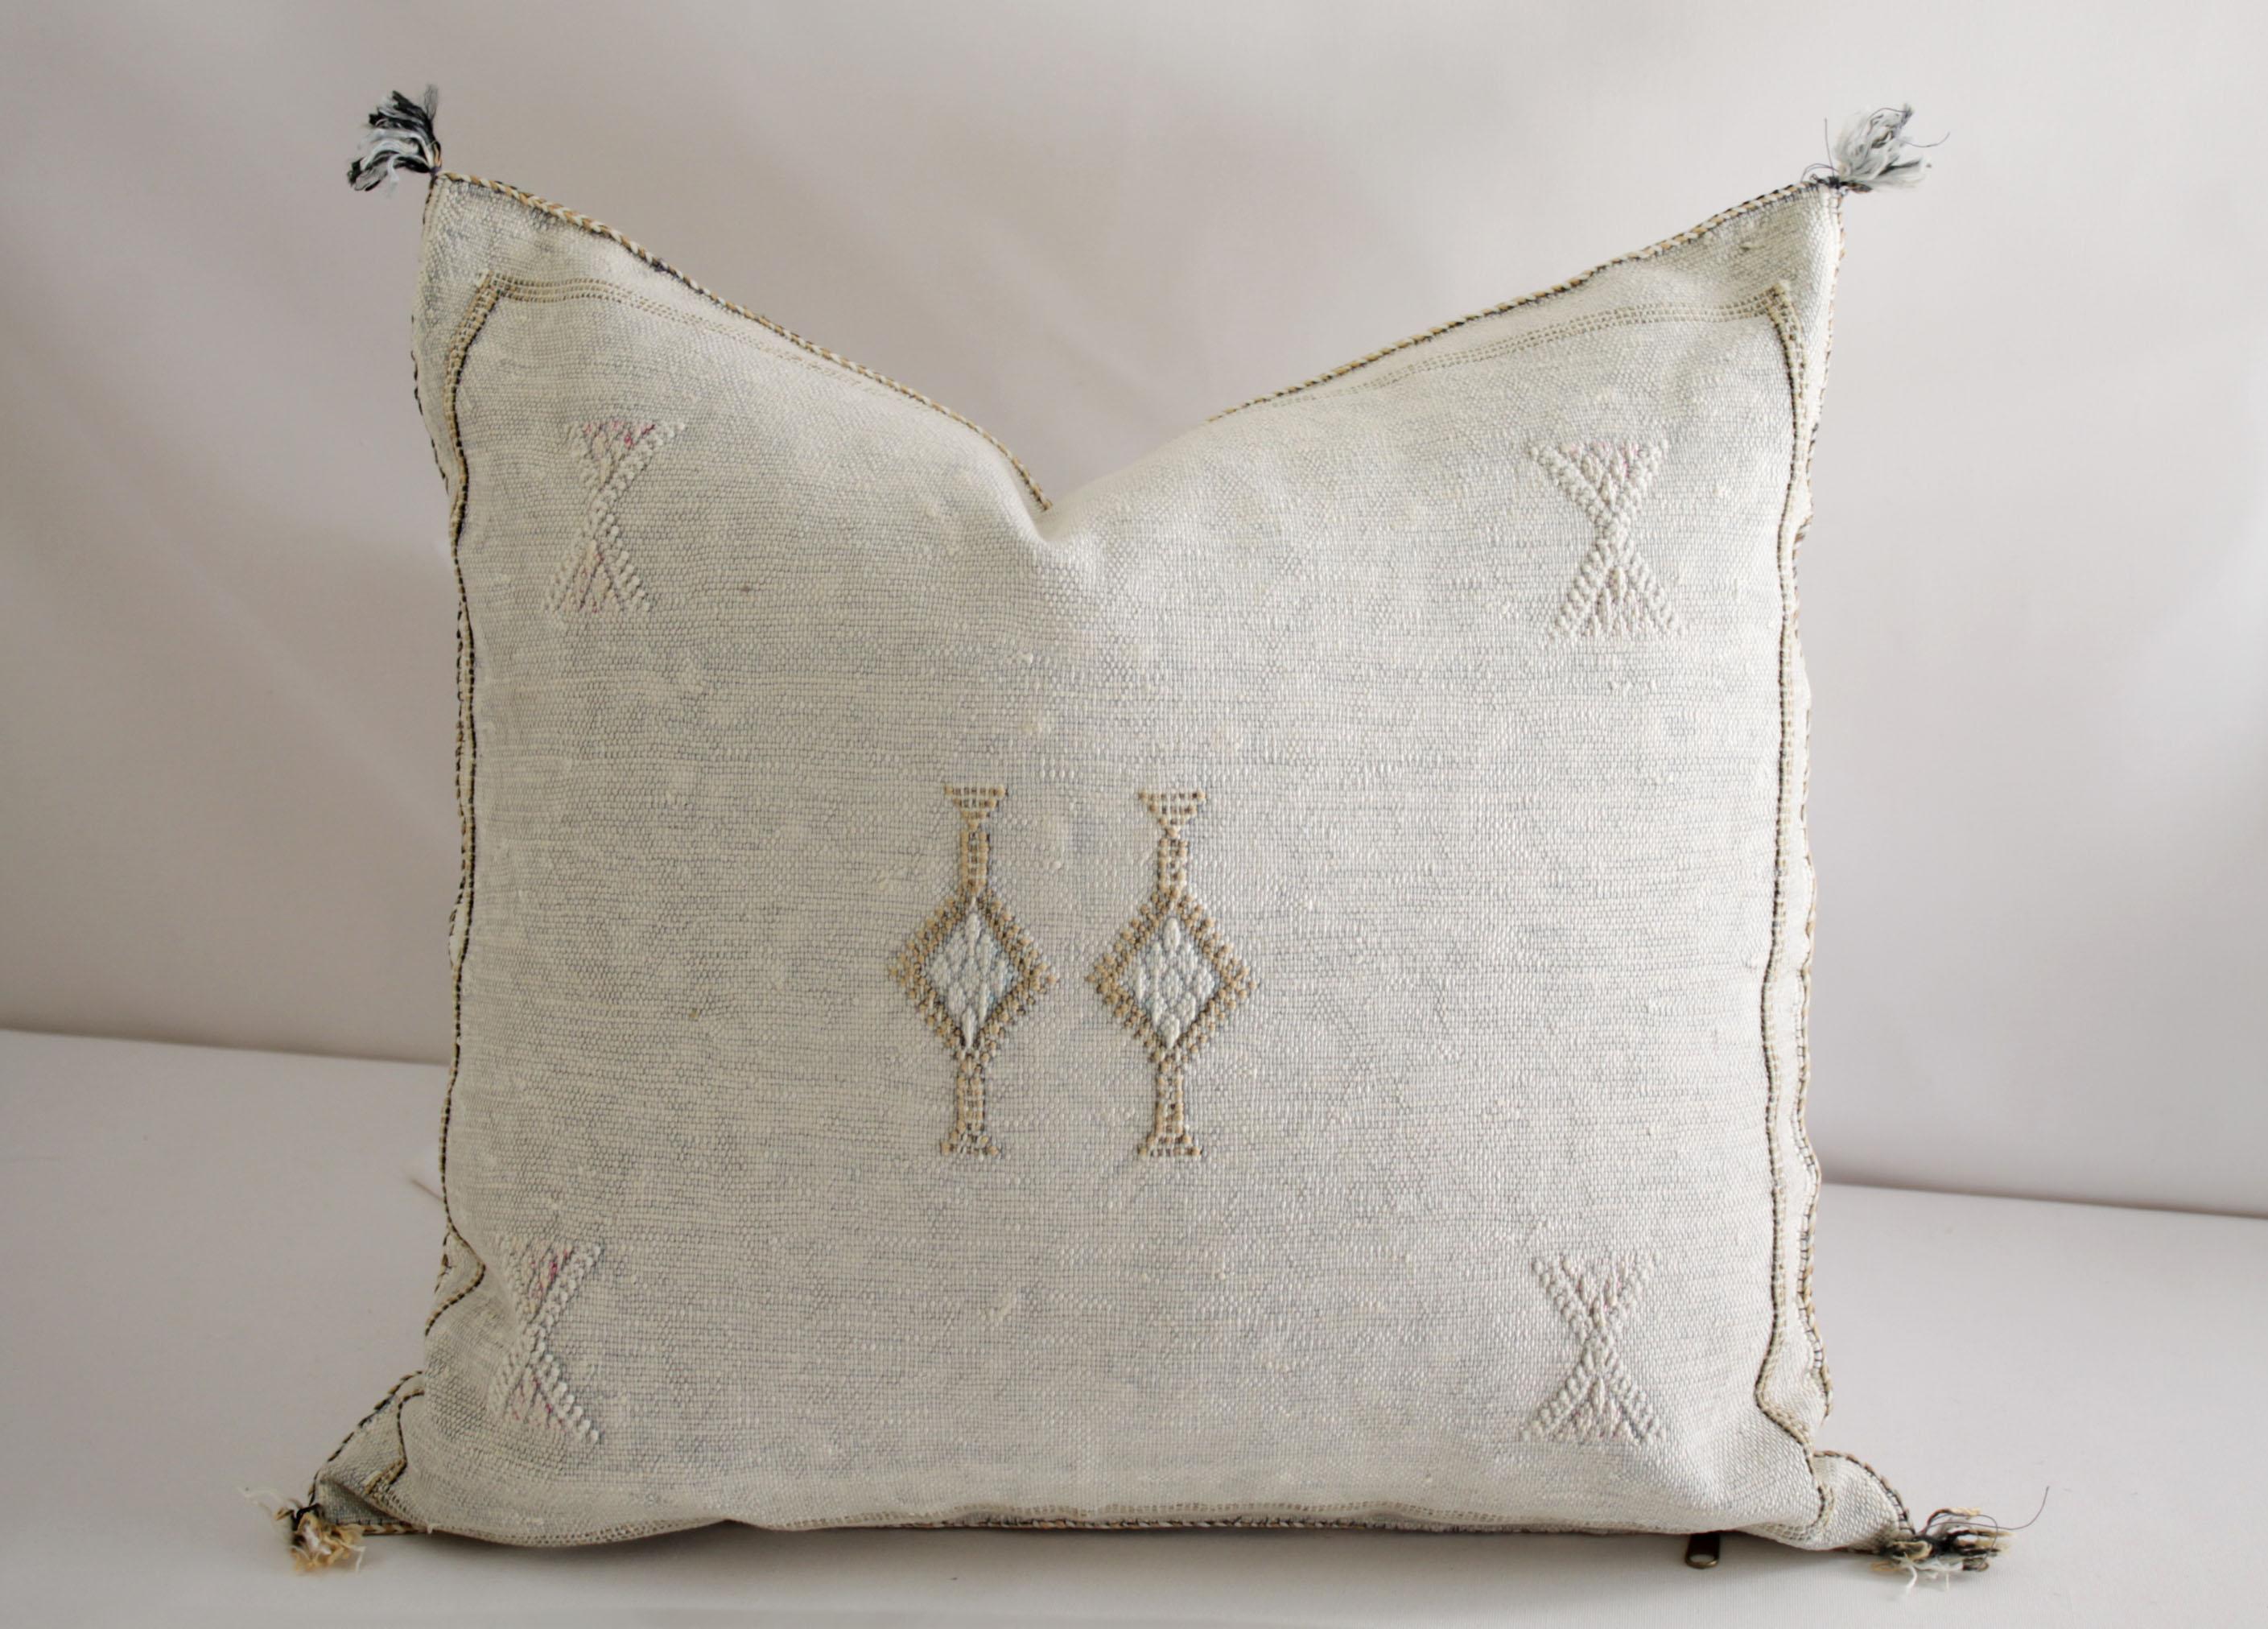 Moroccan handwoven cactus silk pillow
As shown with a beautiful light oyster tone background, and white, with light brown accents. Hidden zipper closure, backside is the same plain cactus silk with no embroidery.
Measures: 18? x 18?
Does not